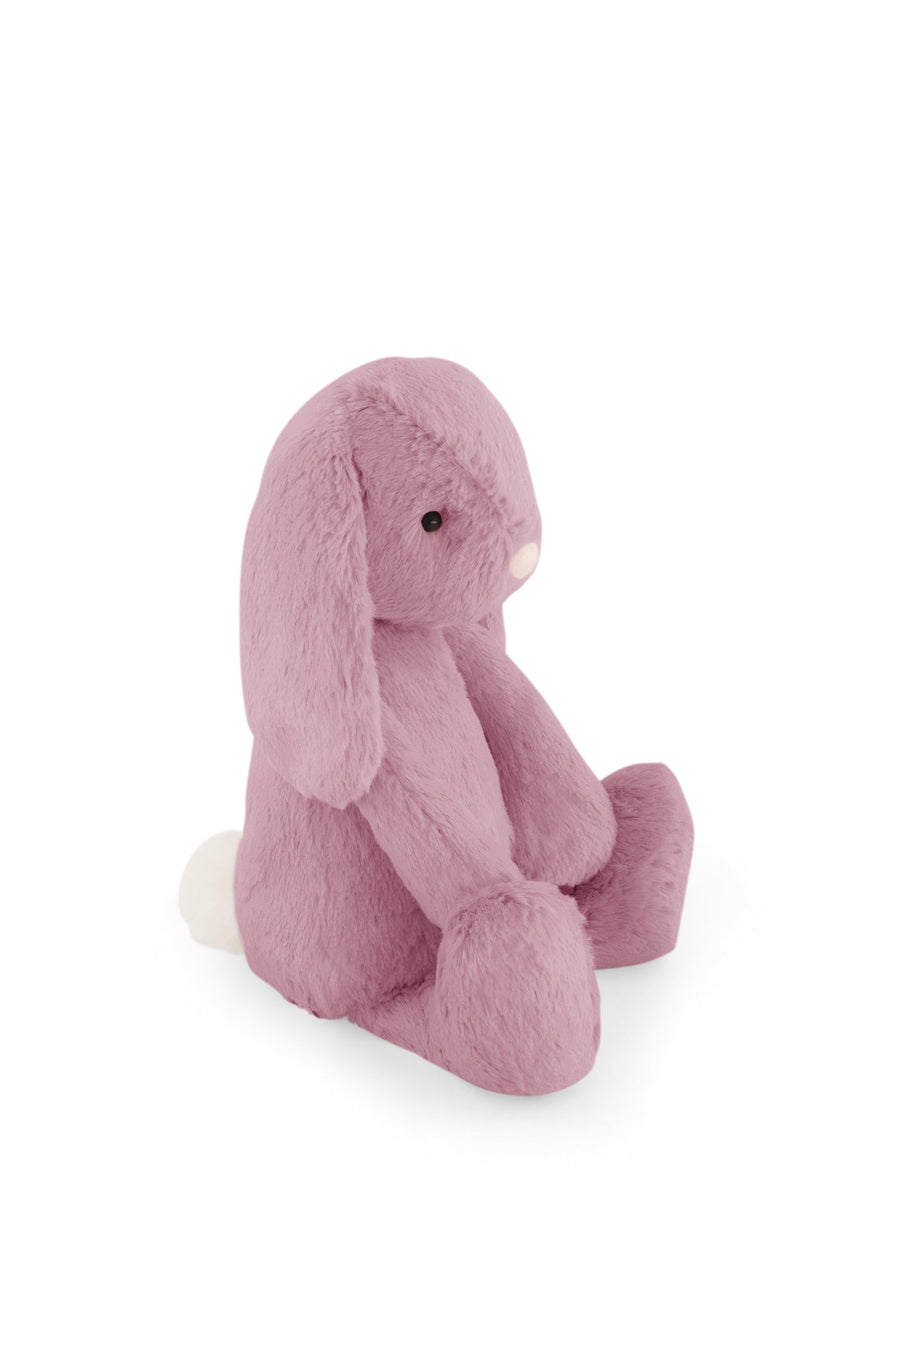 Snuggle Bunnies - Penelope the Bunny - Lilium Childrens Toy from Jamie Kay NZ